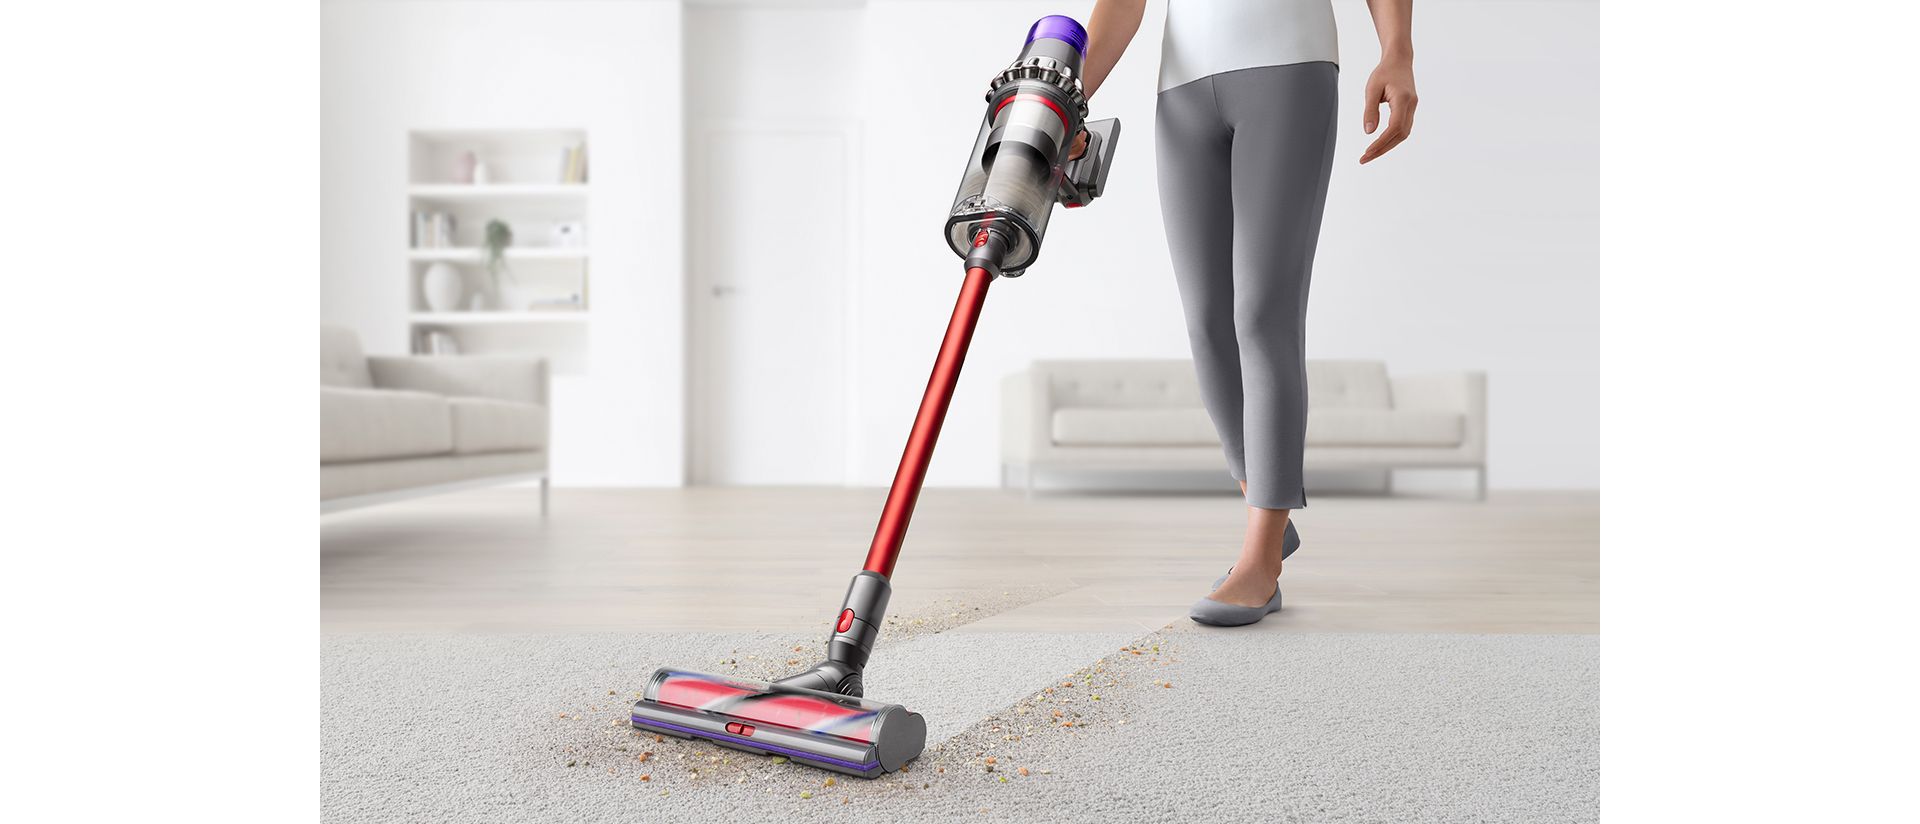 can i use dyson v8 to clean mattress